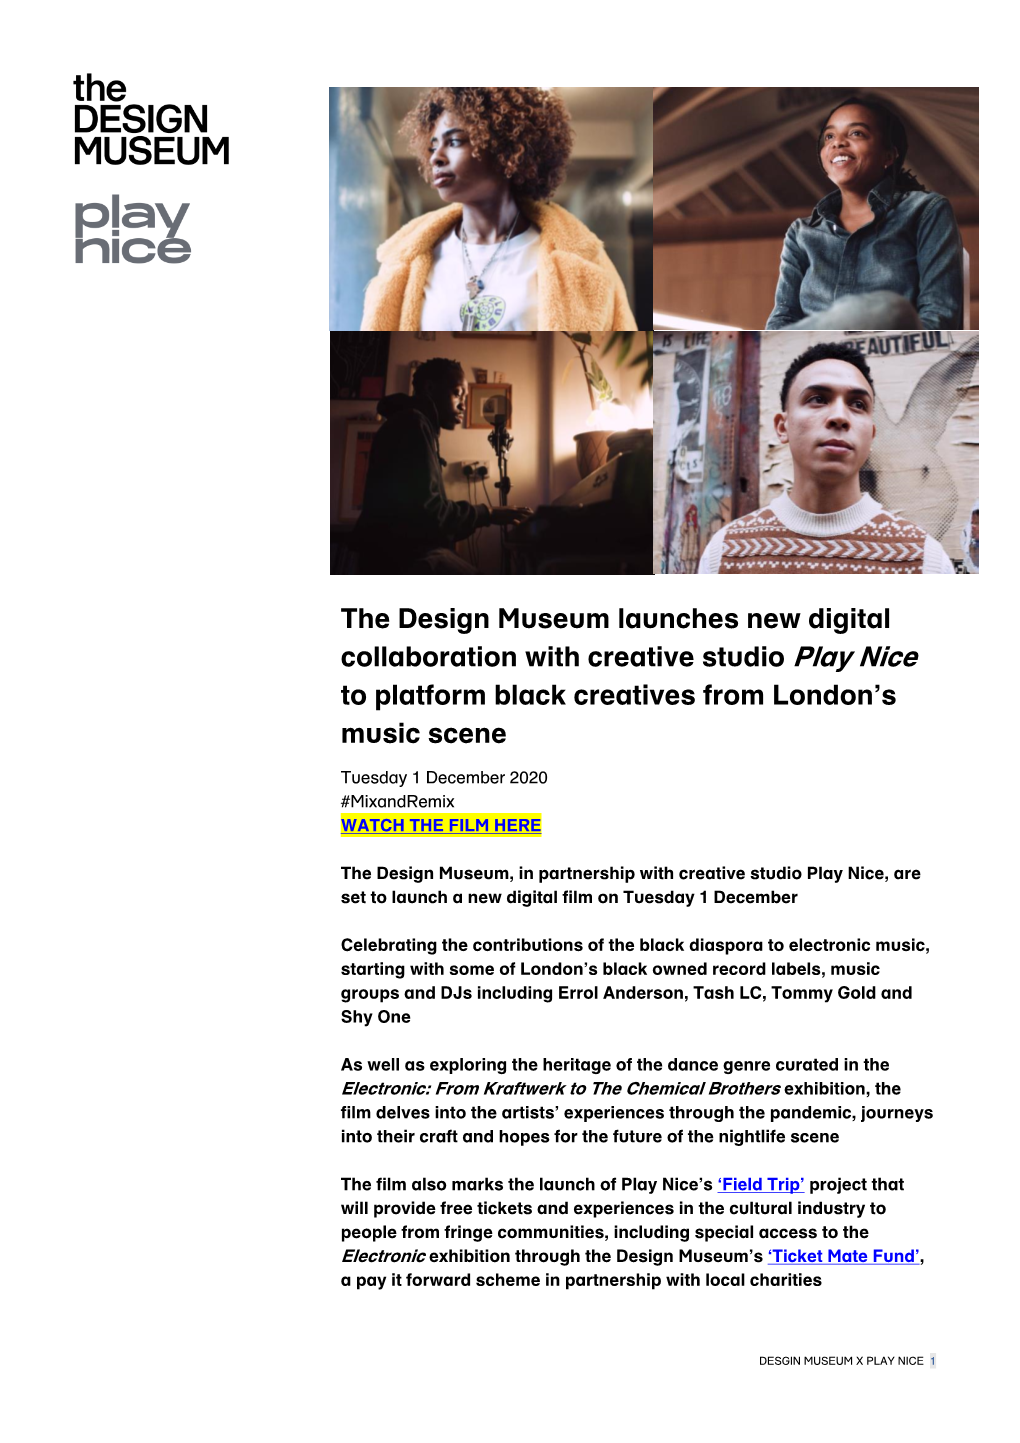 The Design Museum Launches New Digital Collaboration with Creative Studio Play Nice to Platform Black Creatives from London’S Music Scene